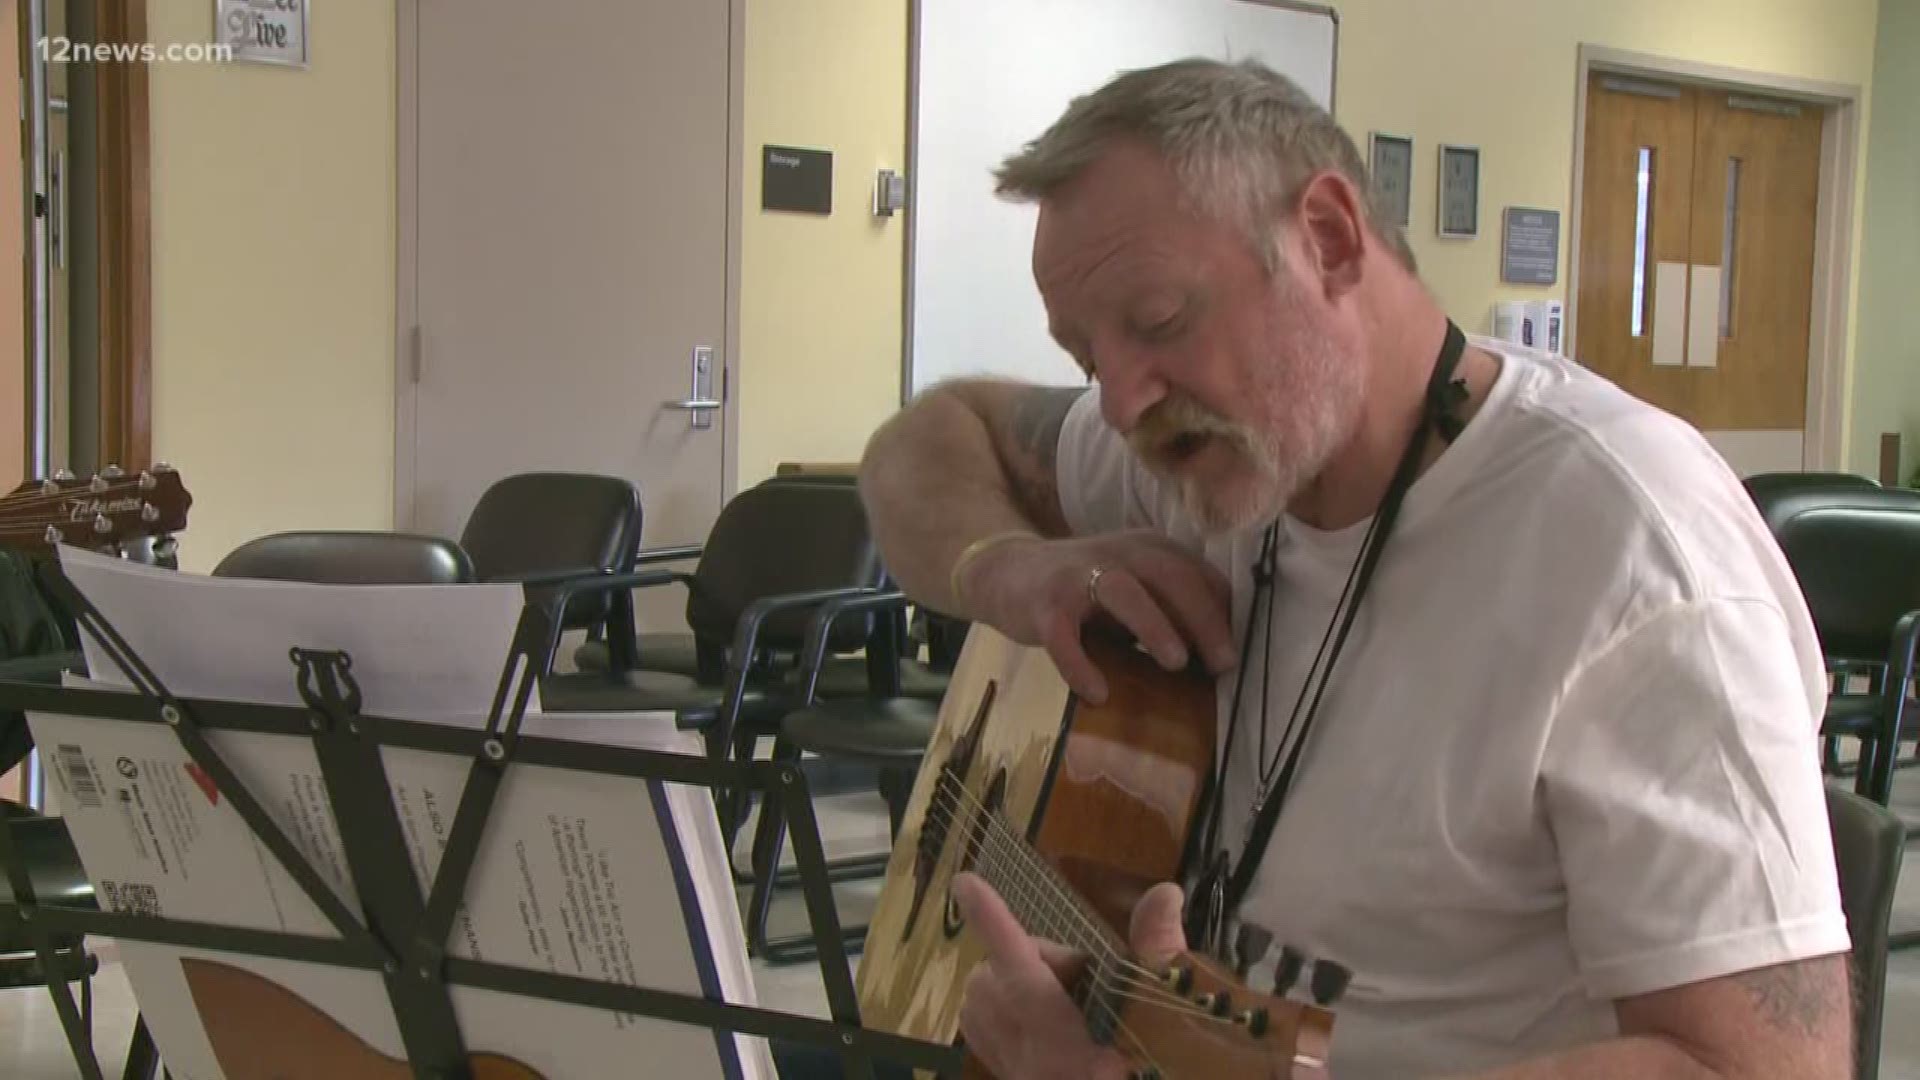 A group of men in Prescott is finding solace in learning to play the guitar.